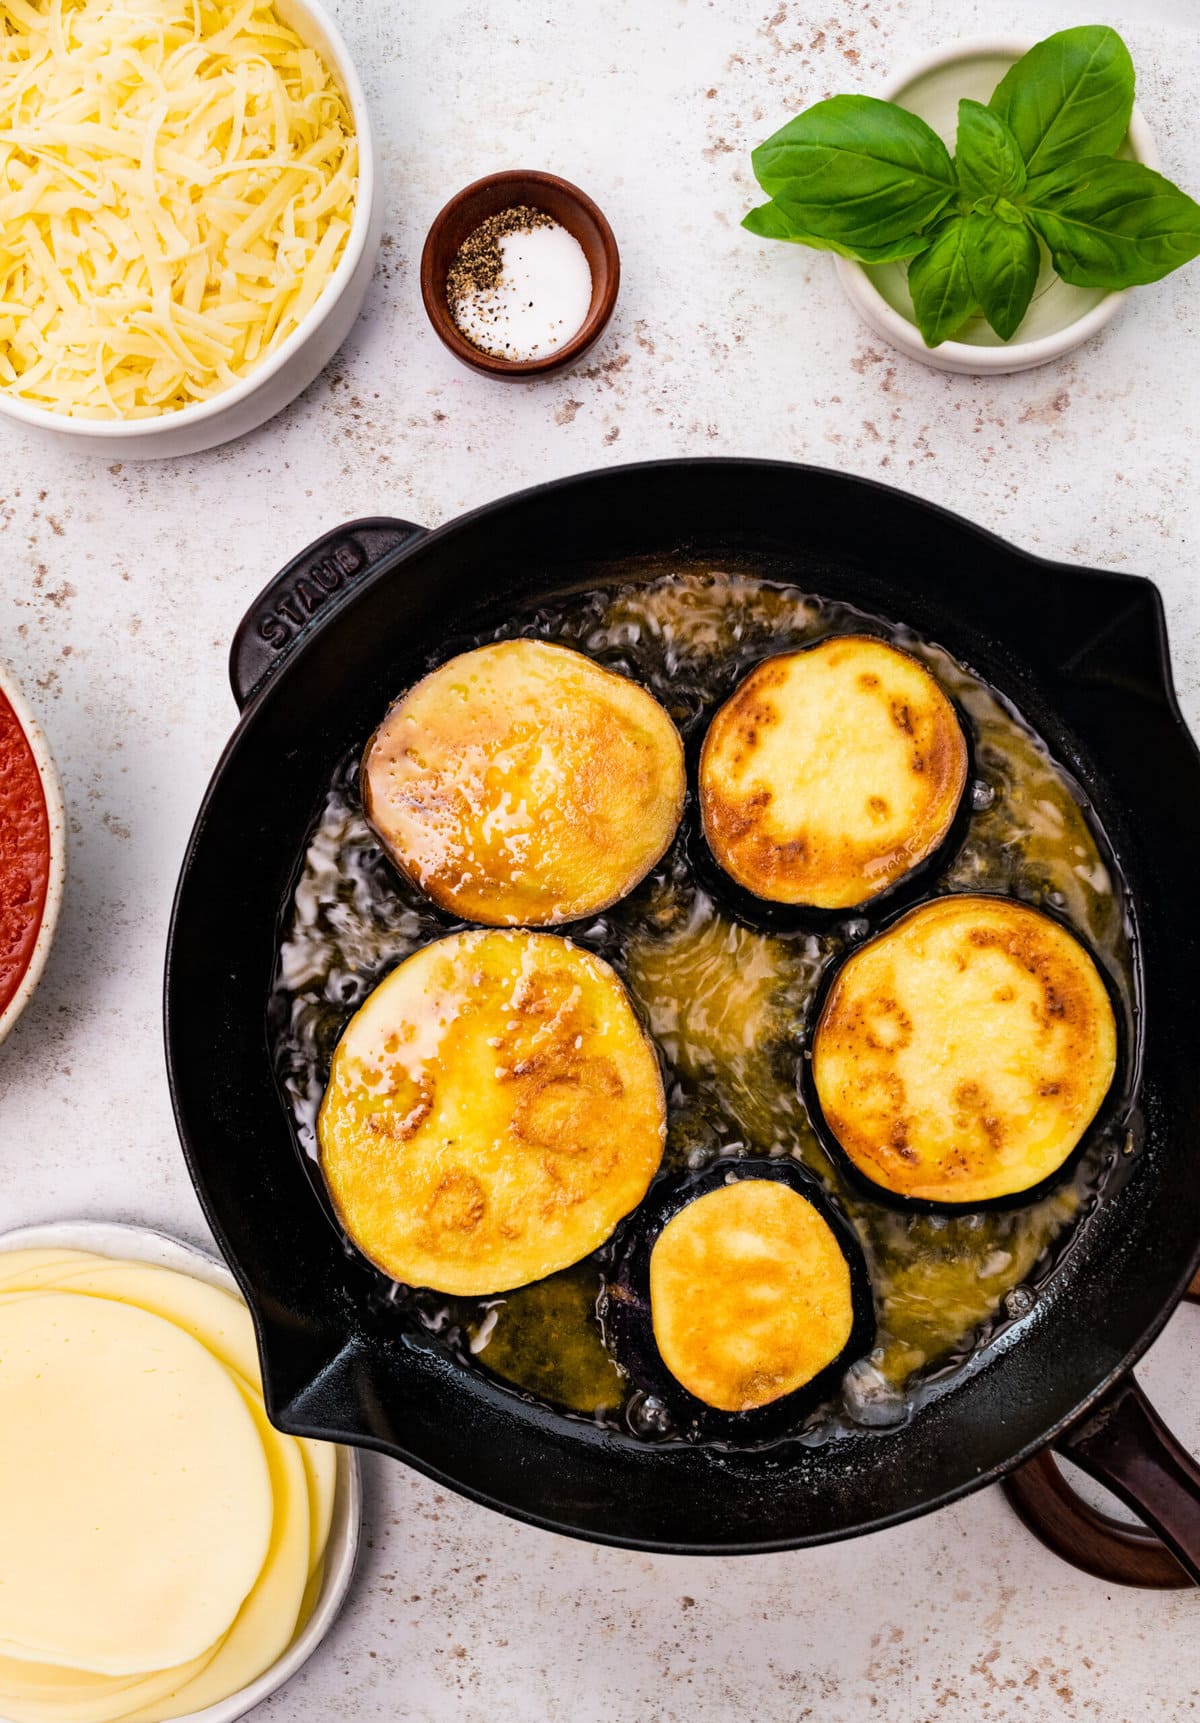 how to make eggplant parmigiana step-by-step: frying the eggplant on both sides in olive oil.